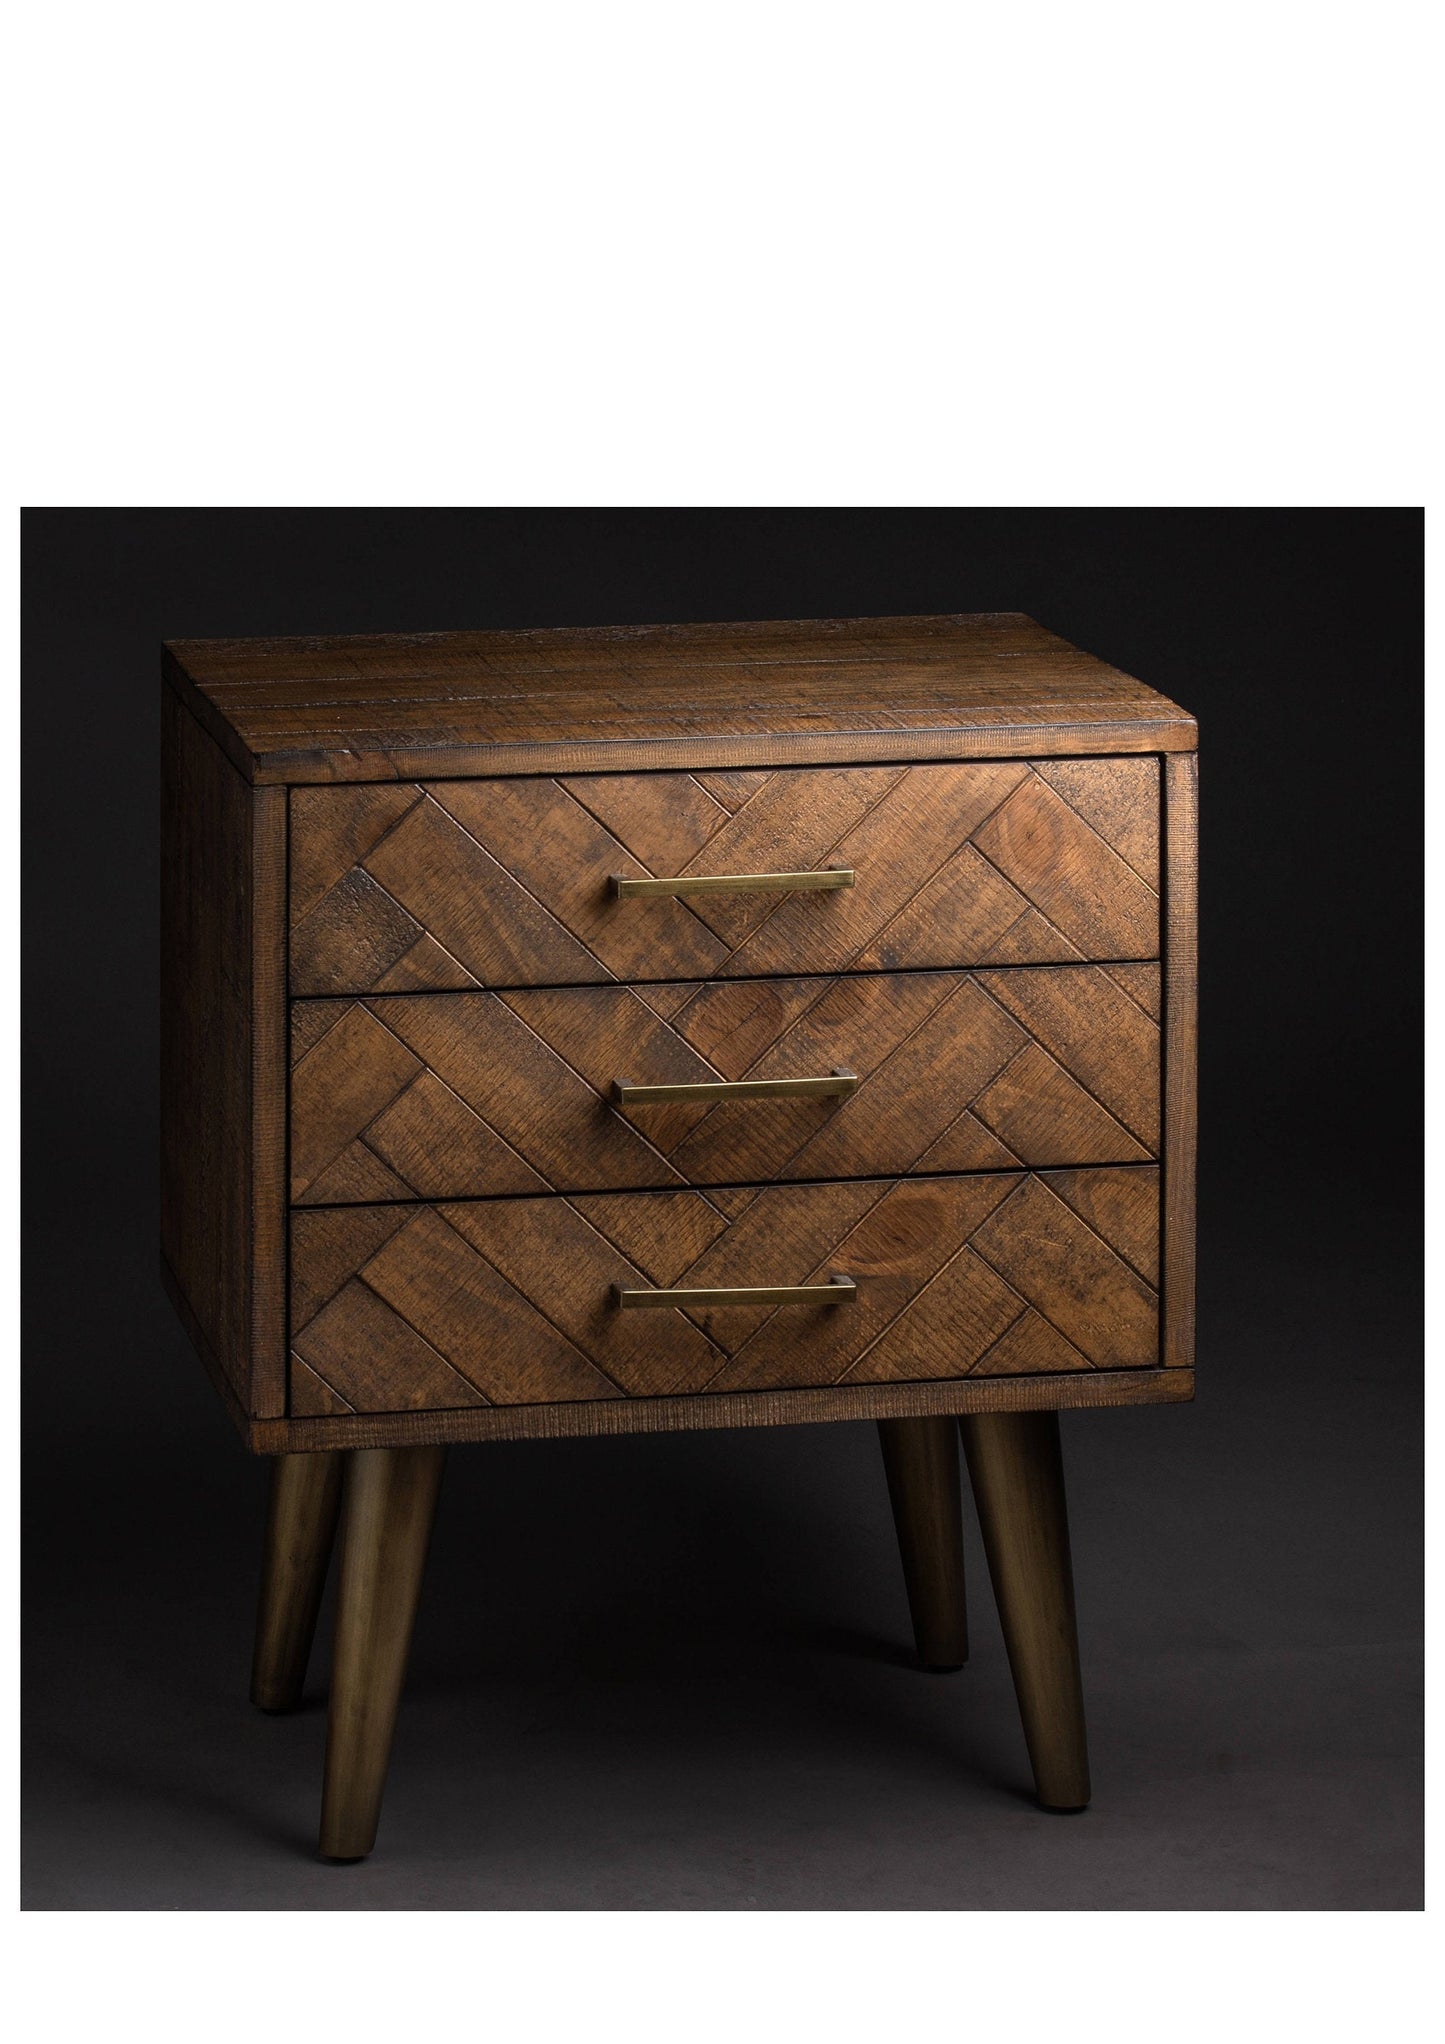 Solid wood chevron design bedside table with gold handles